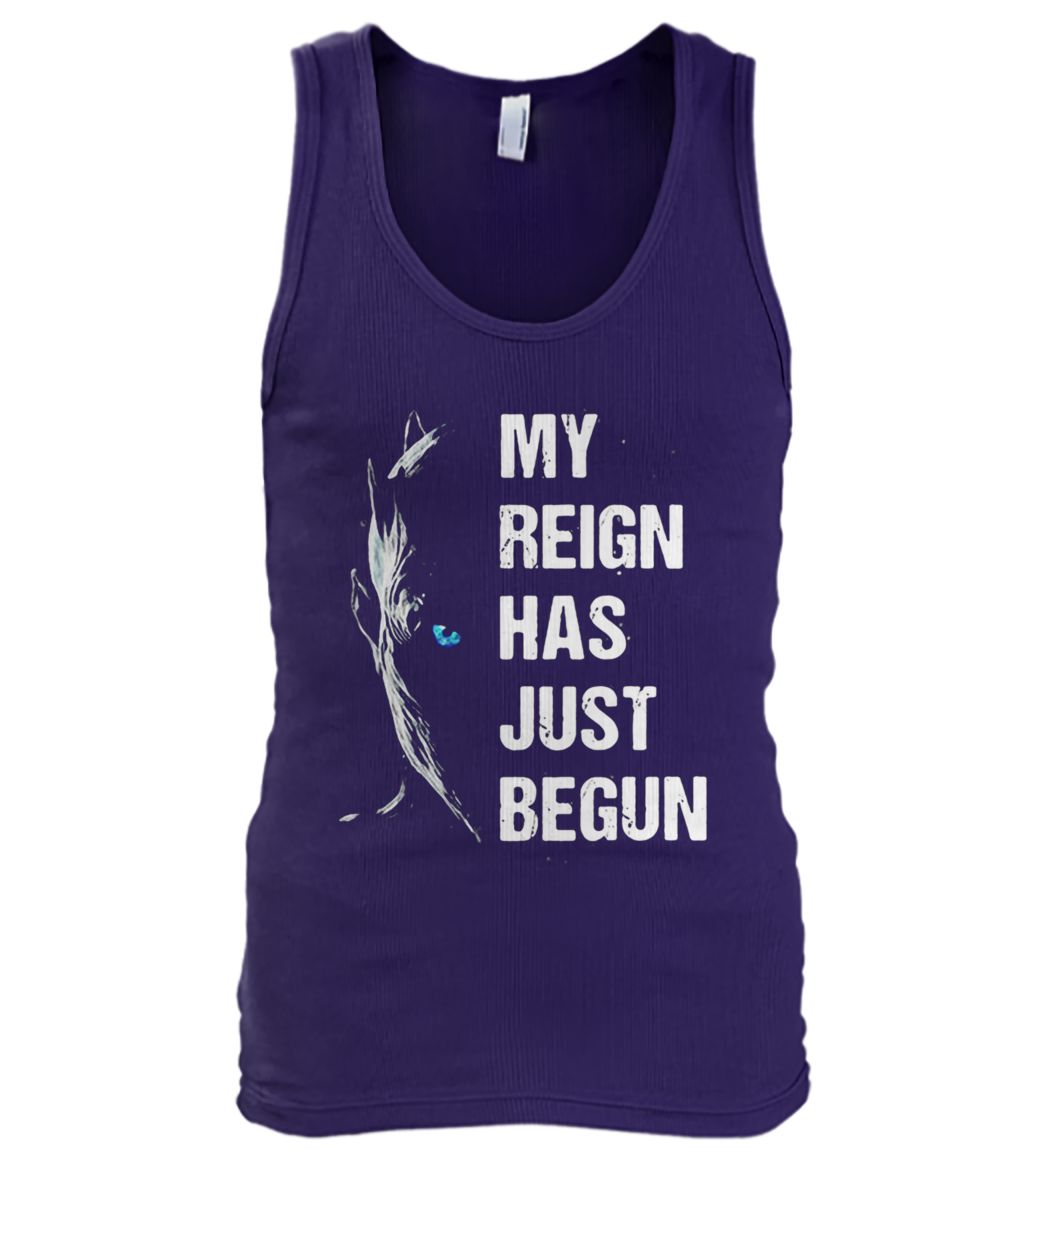 Game of thrones white walker the night king my reign has just begun men's tank top